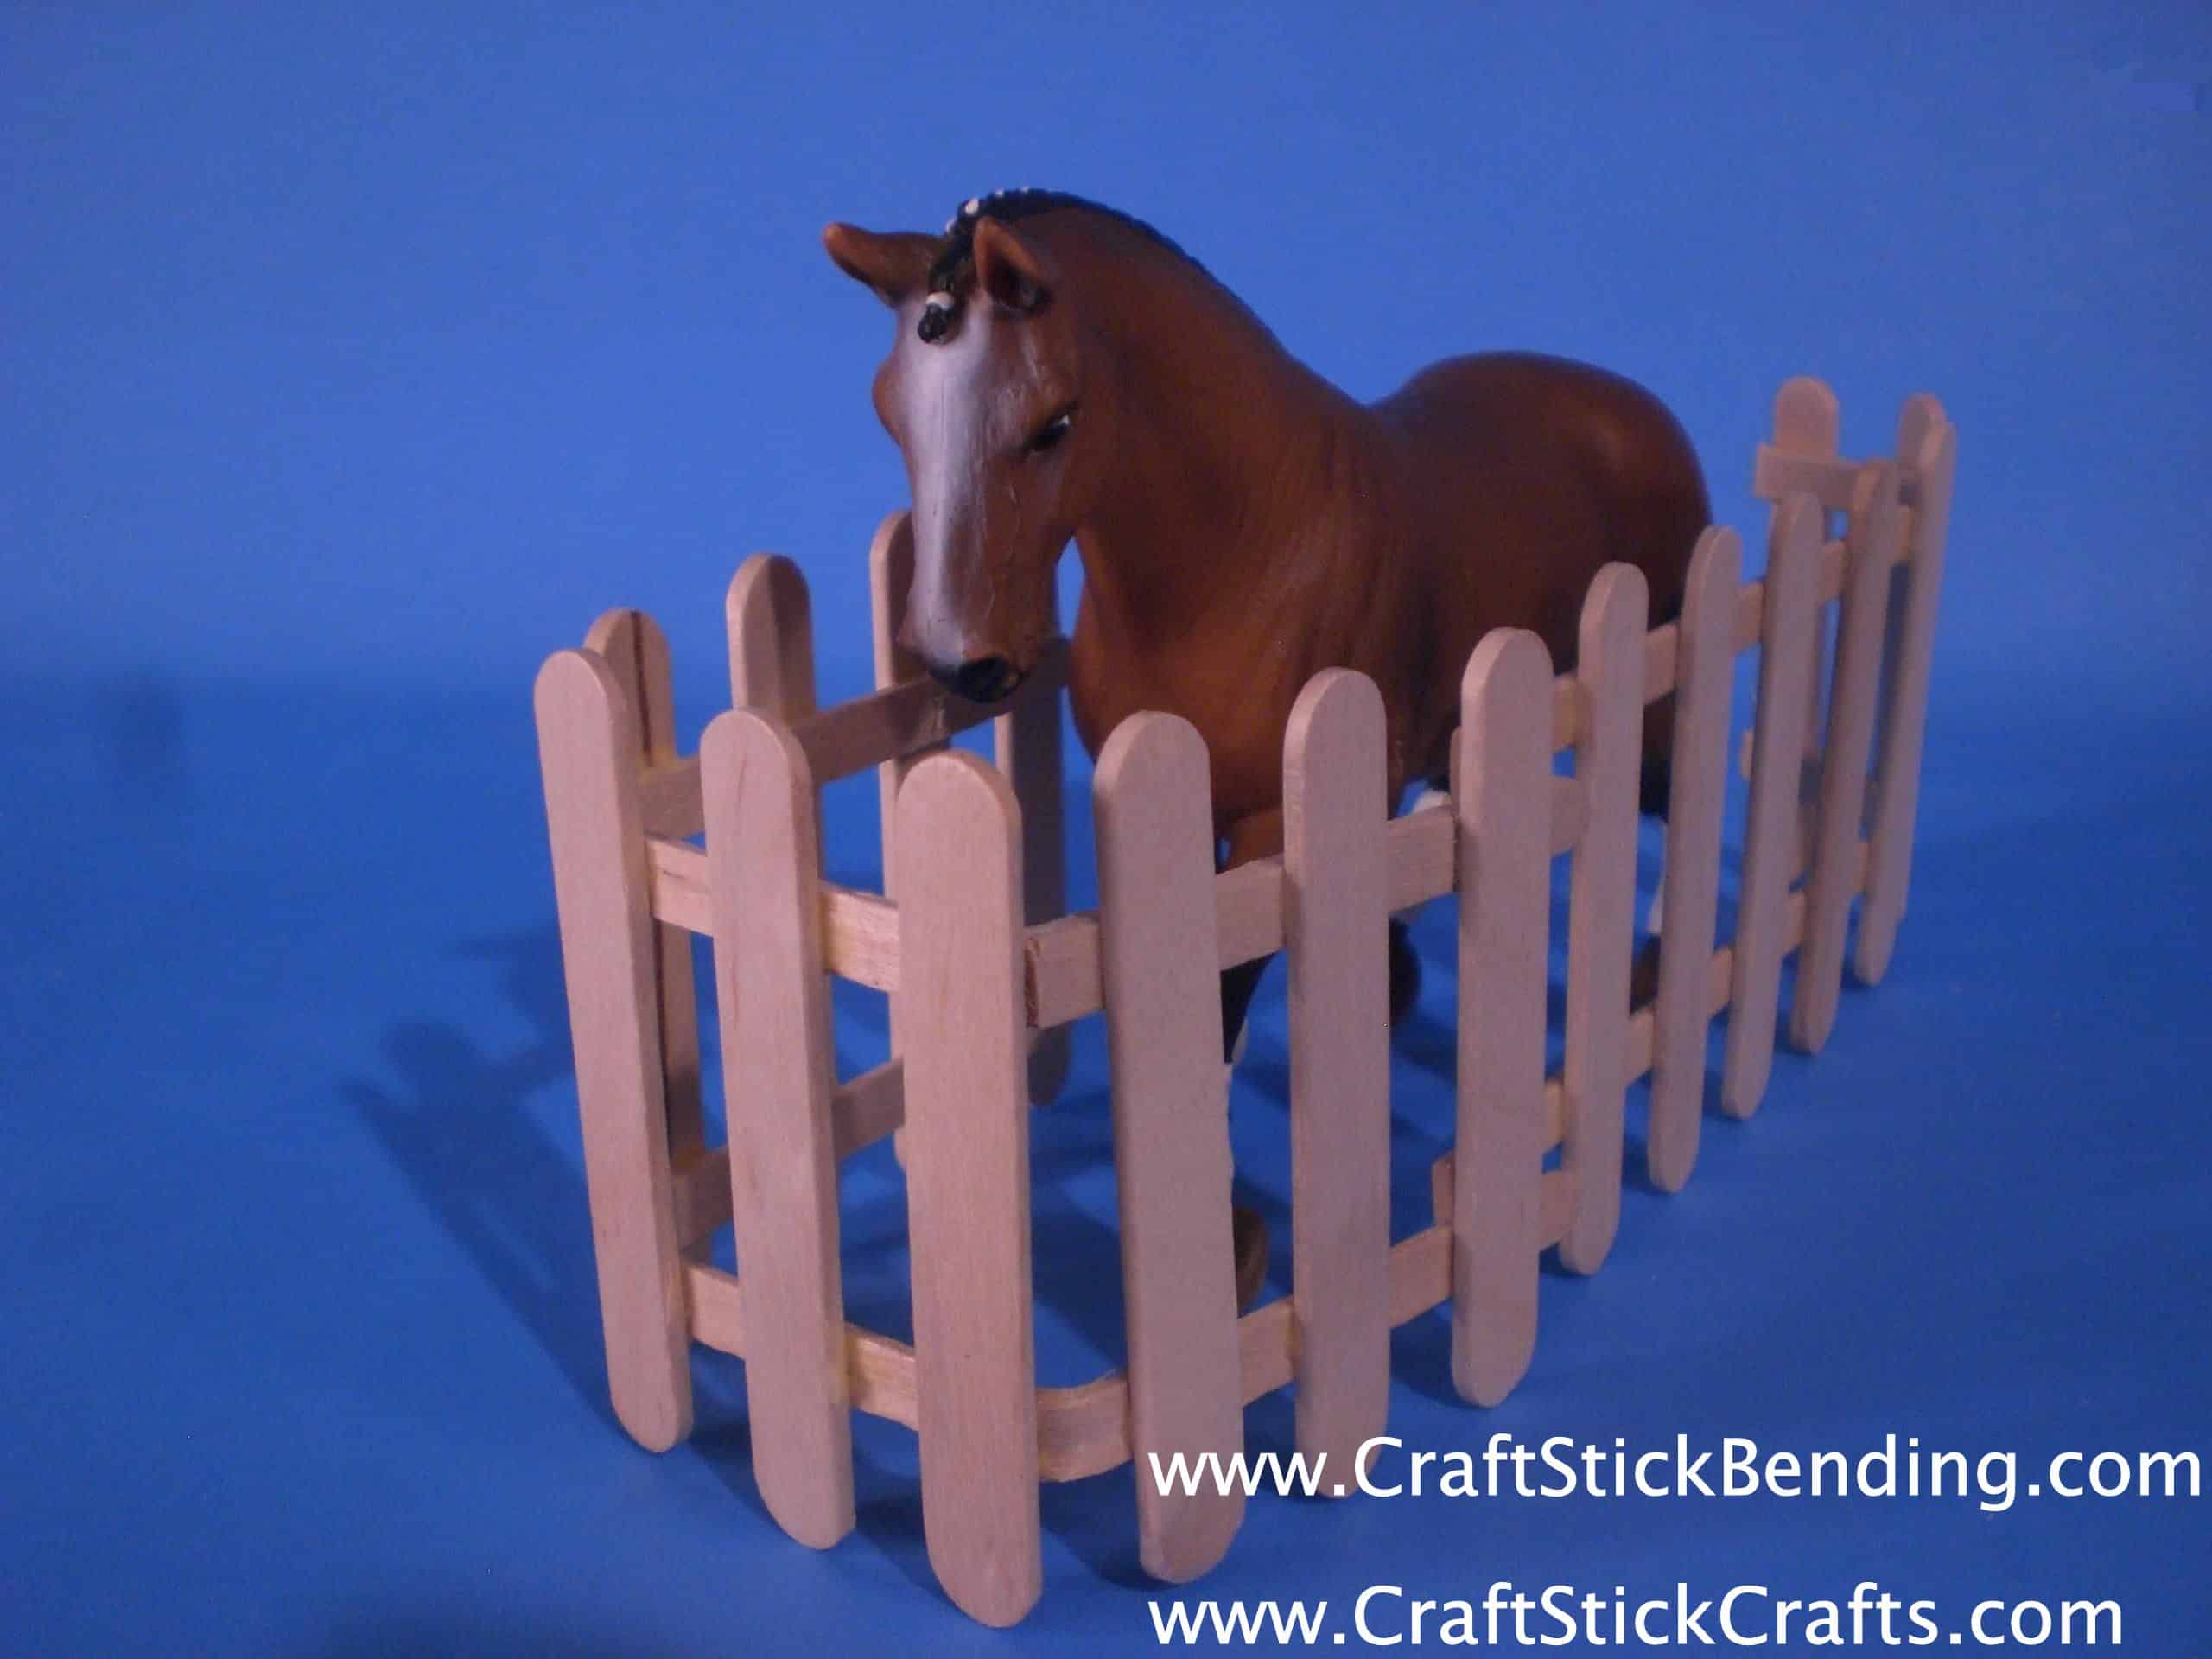 Popsicle stick horse fence